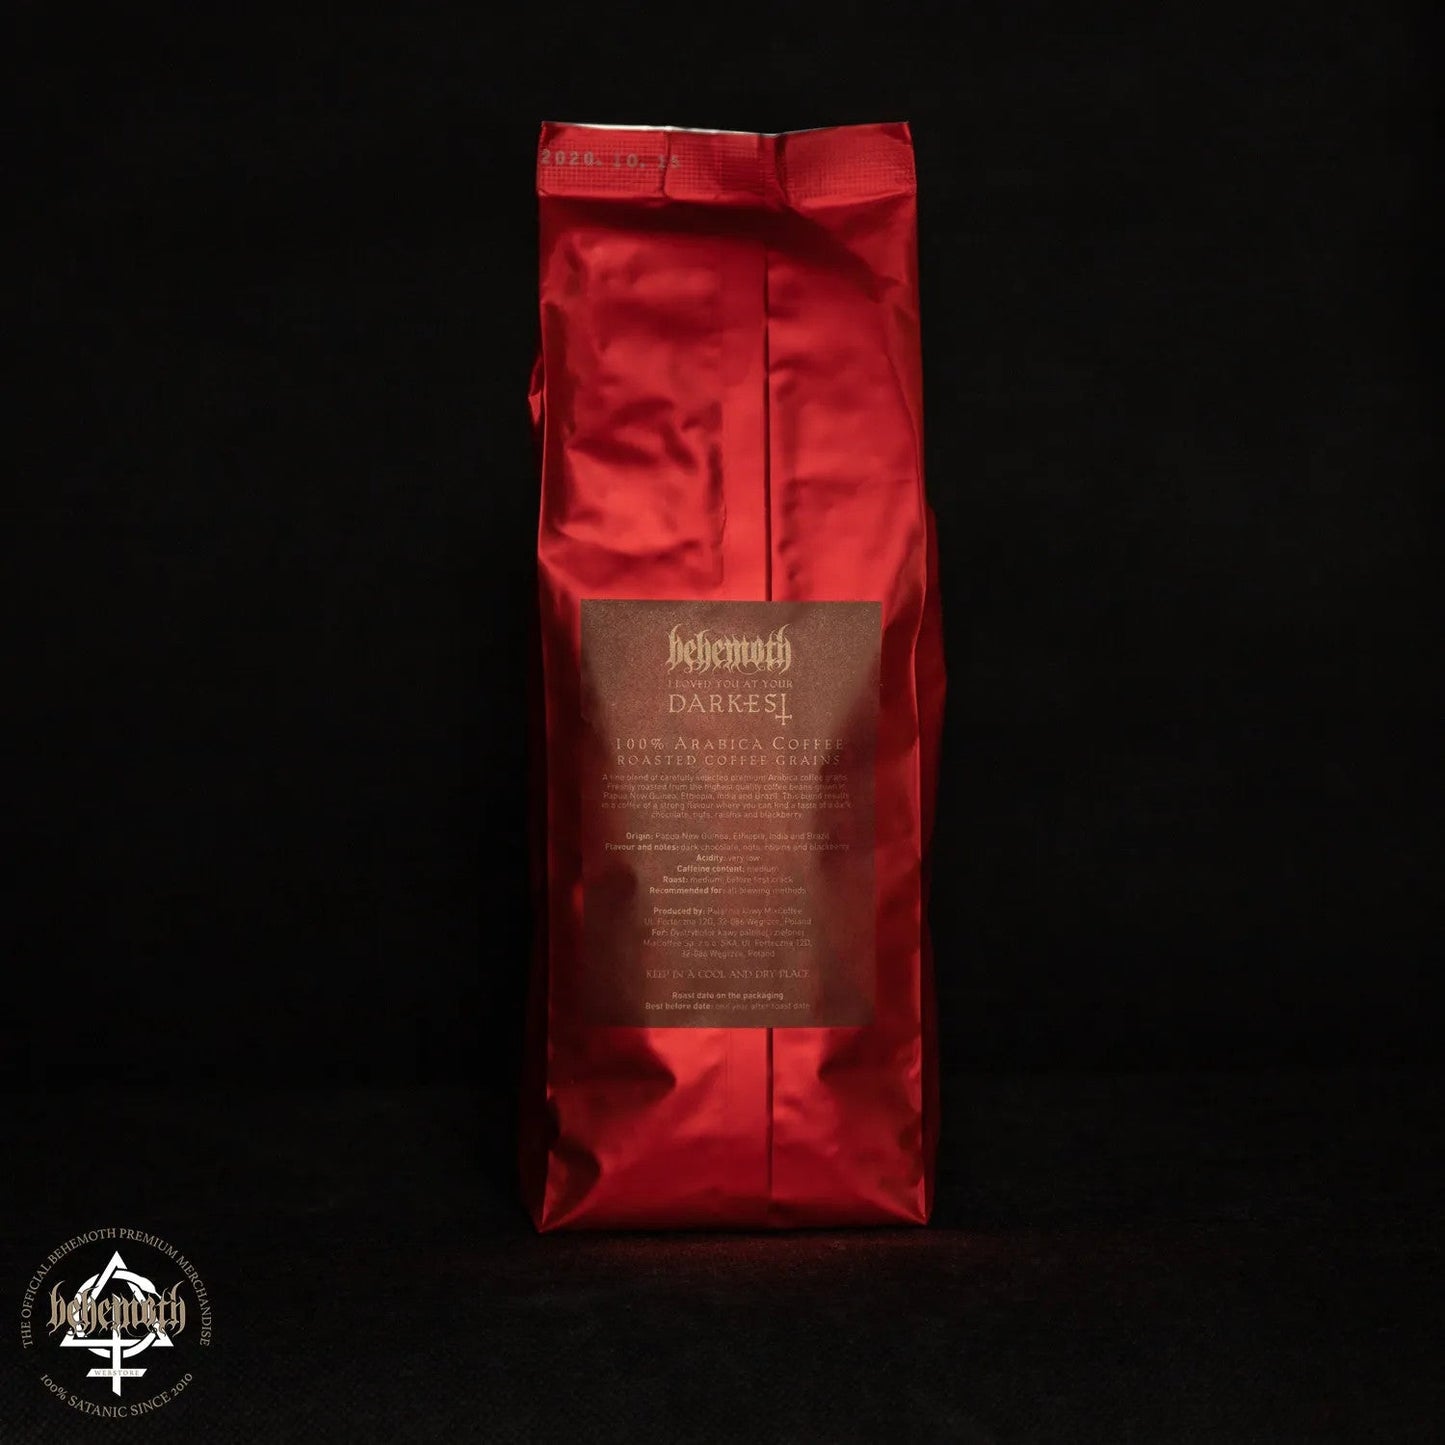 Behemoth 'I Loved You At Your Darkest' whole beans coffee 500 g / 1 lb